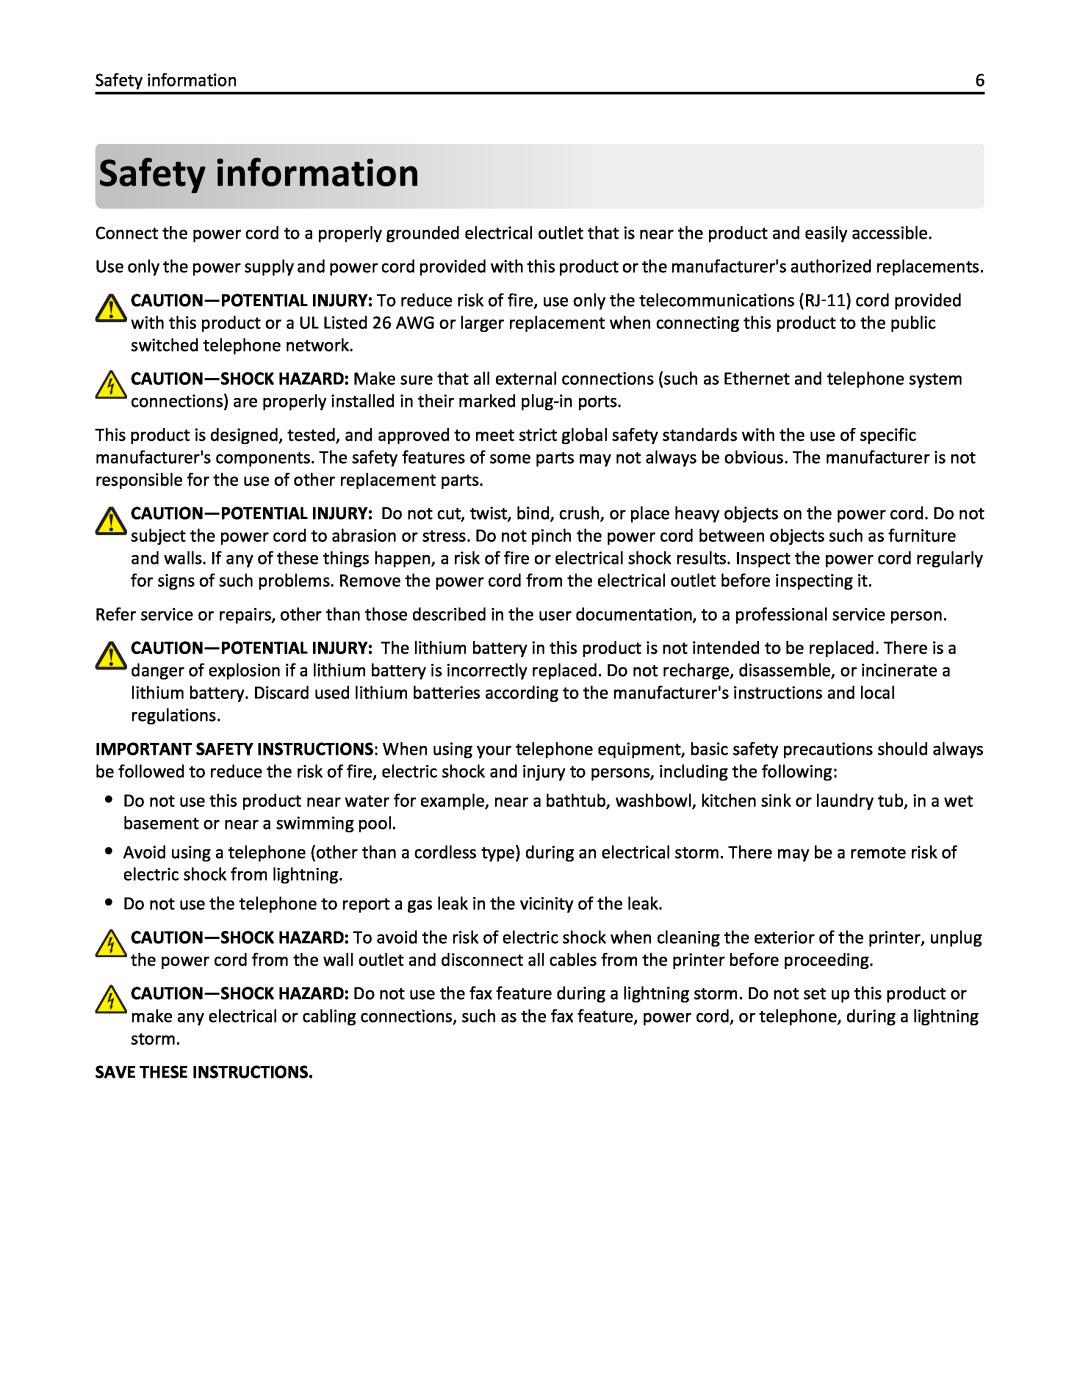 Lexmark PRO4000C, 90P3000 manual Safety information, Save These Instructions 